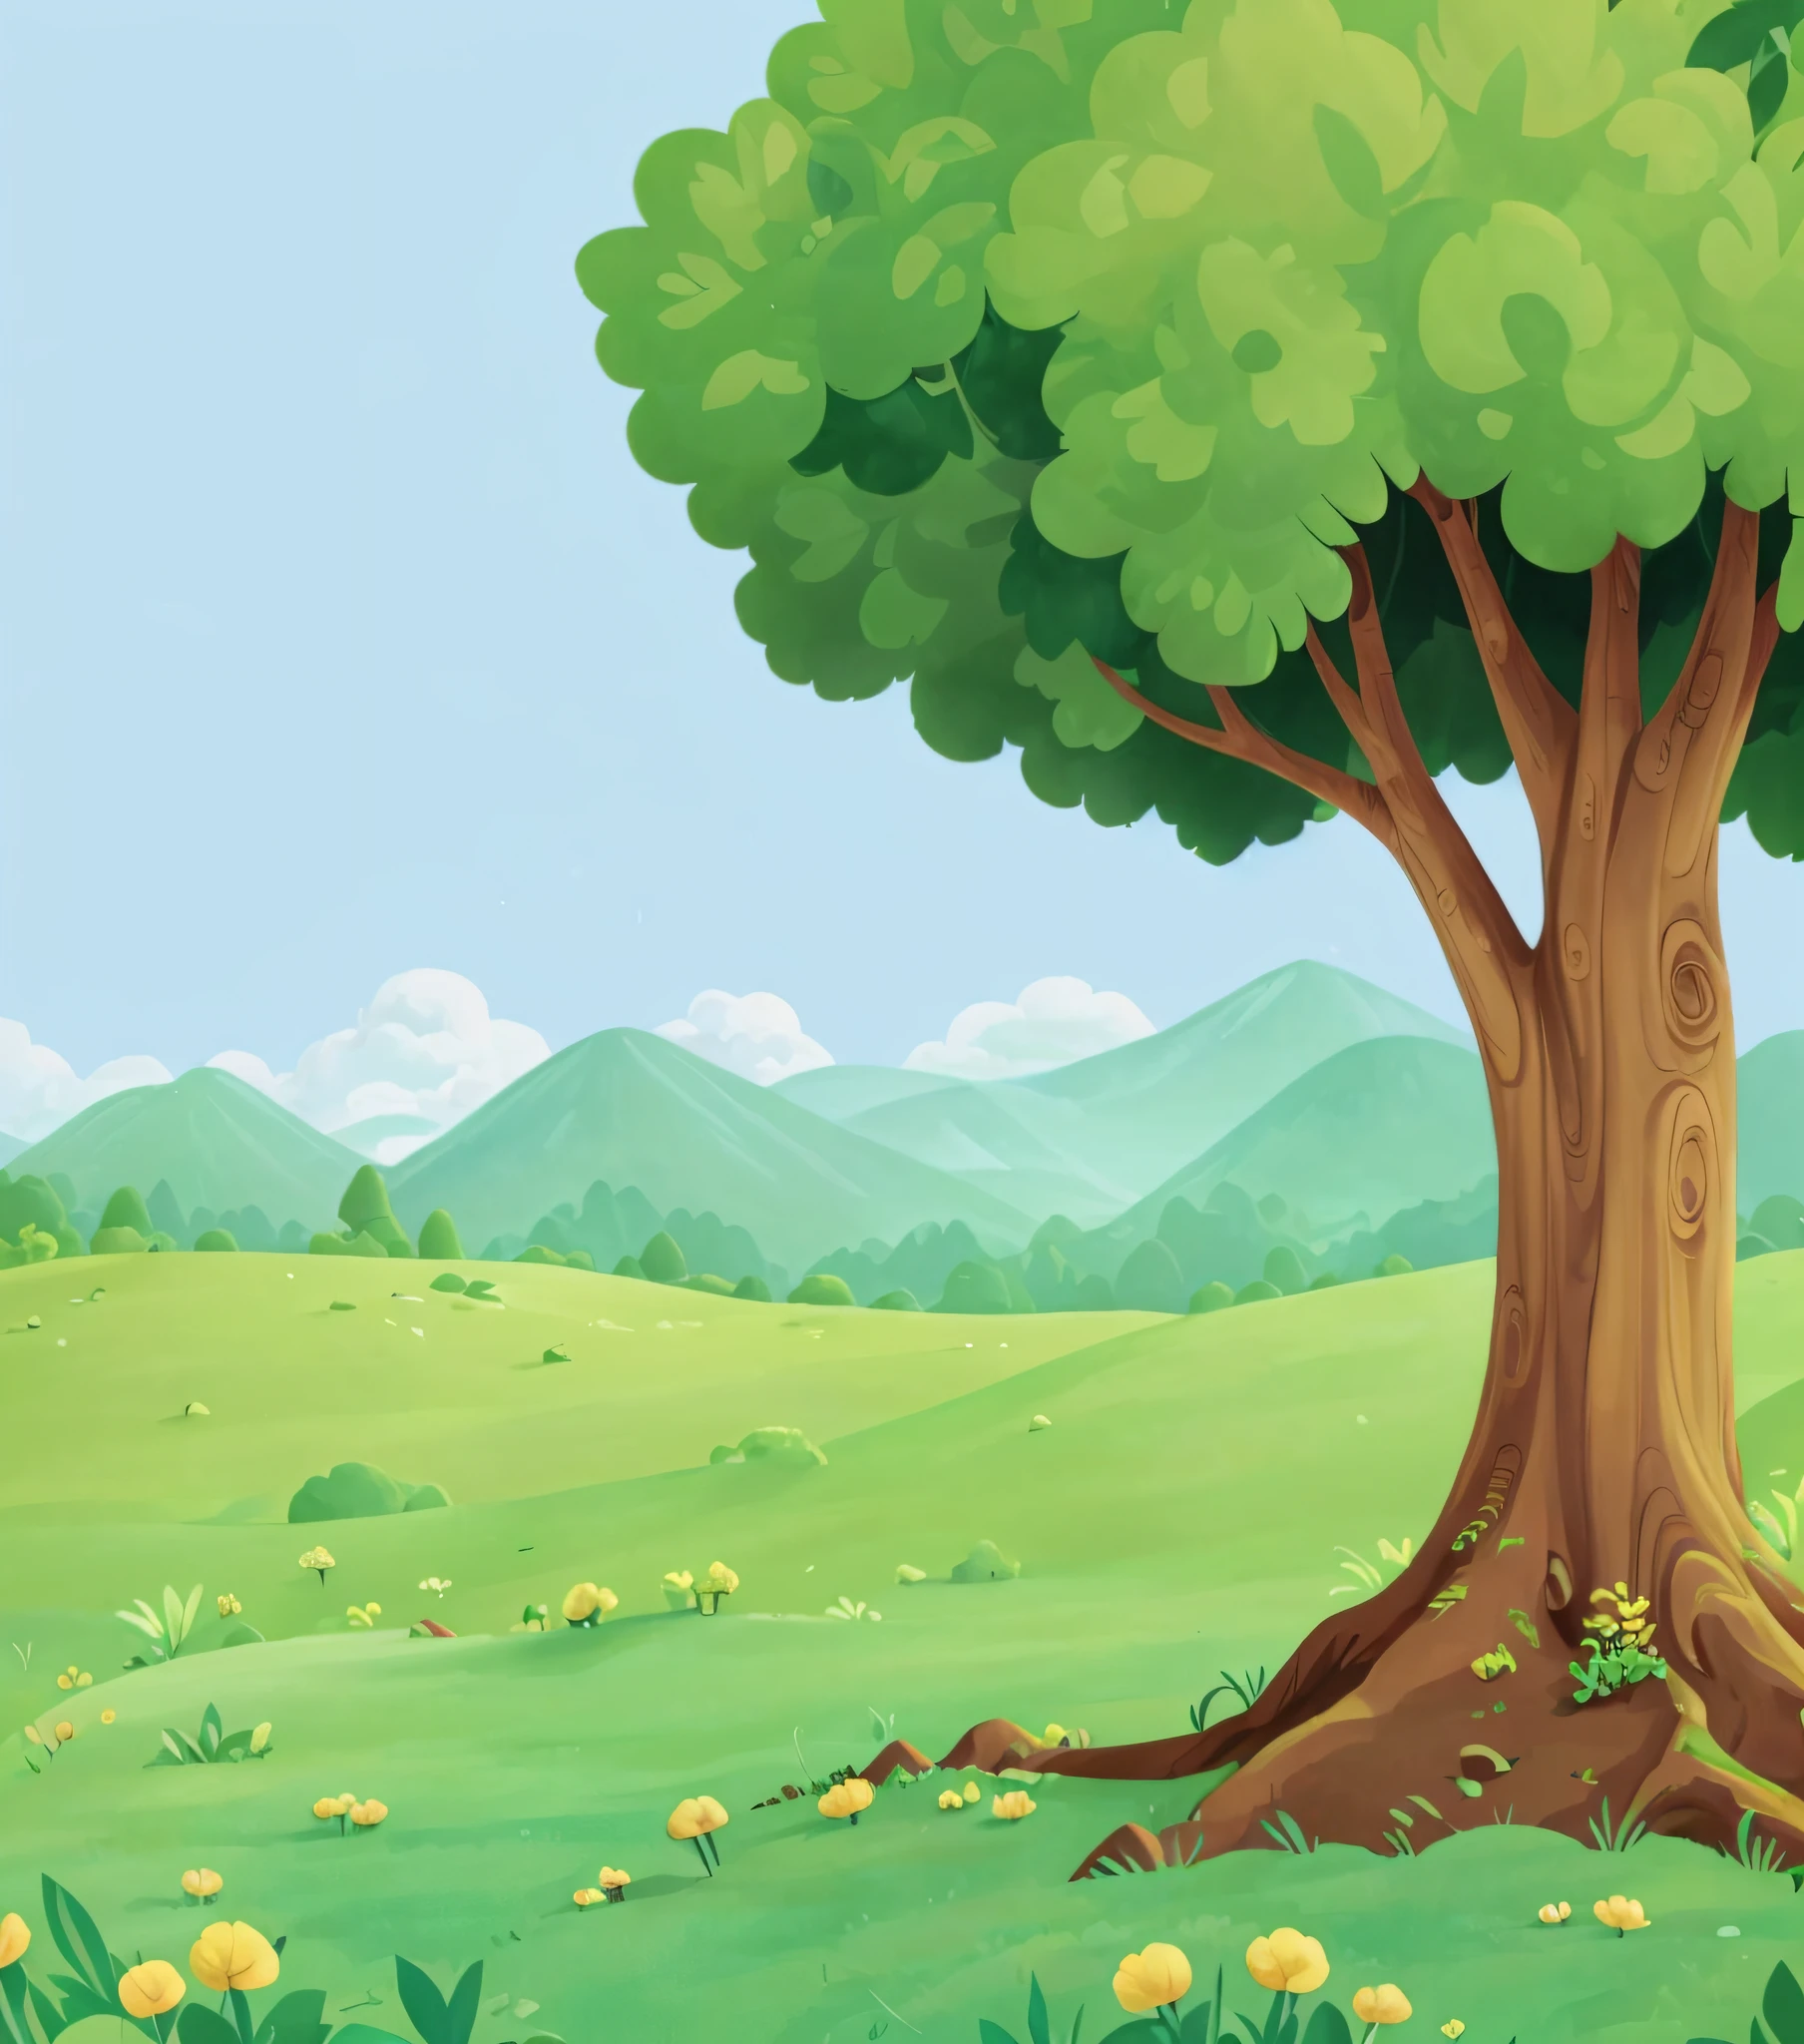 storybook illustration，Illustration of a tree on green meadow，The background is mountains, arte de fundo, background artwork, Natural background, Landscape illustration, Park background, the tree is growing on a meadow, Natural background, setting in nature, made of tree and fantasy valley,floorplan。